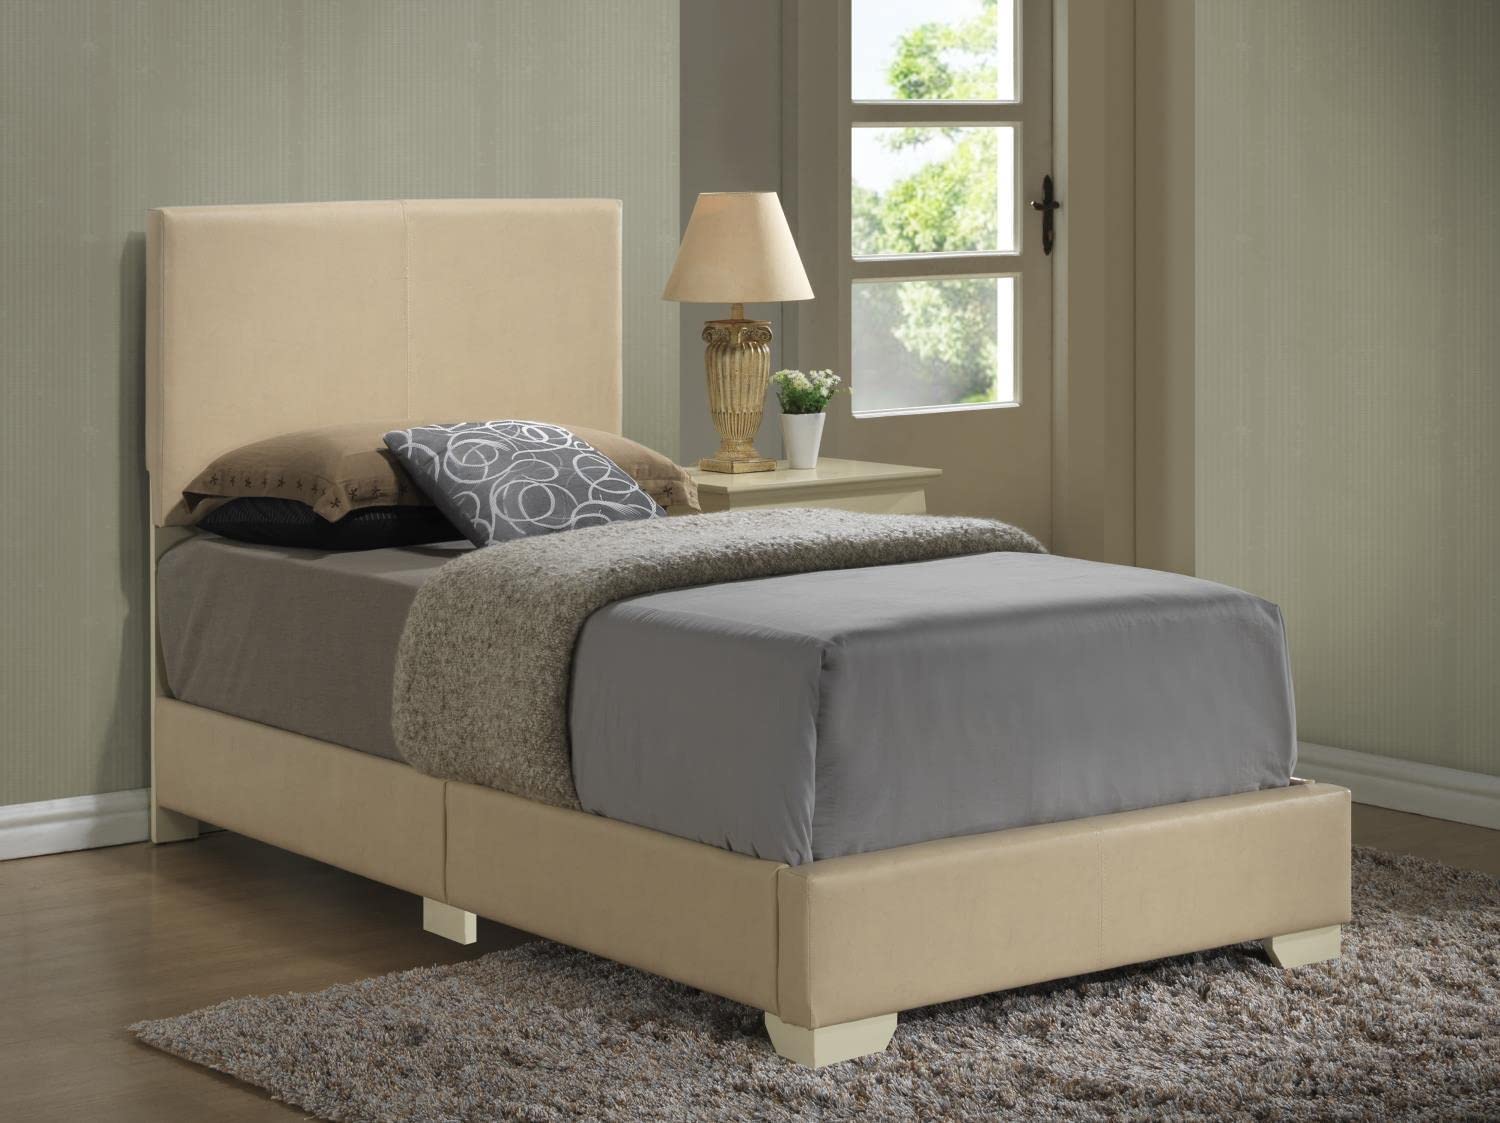 Glory Furniture G1875-TB-UP Sleigh Bed, Twin, Beige, 3 boxes